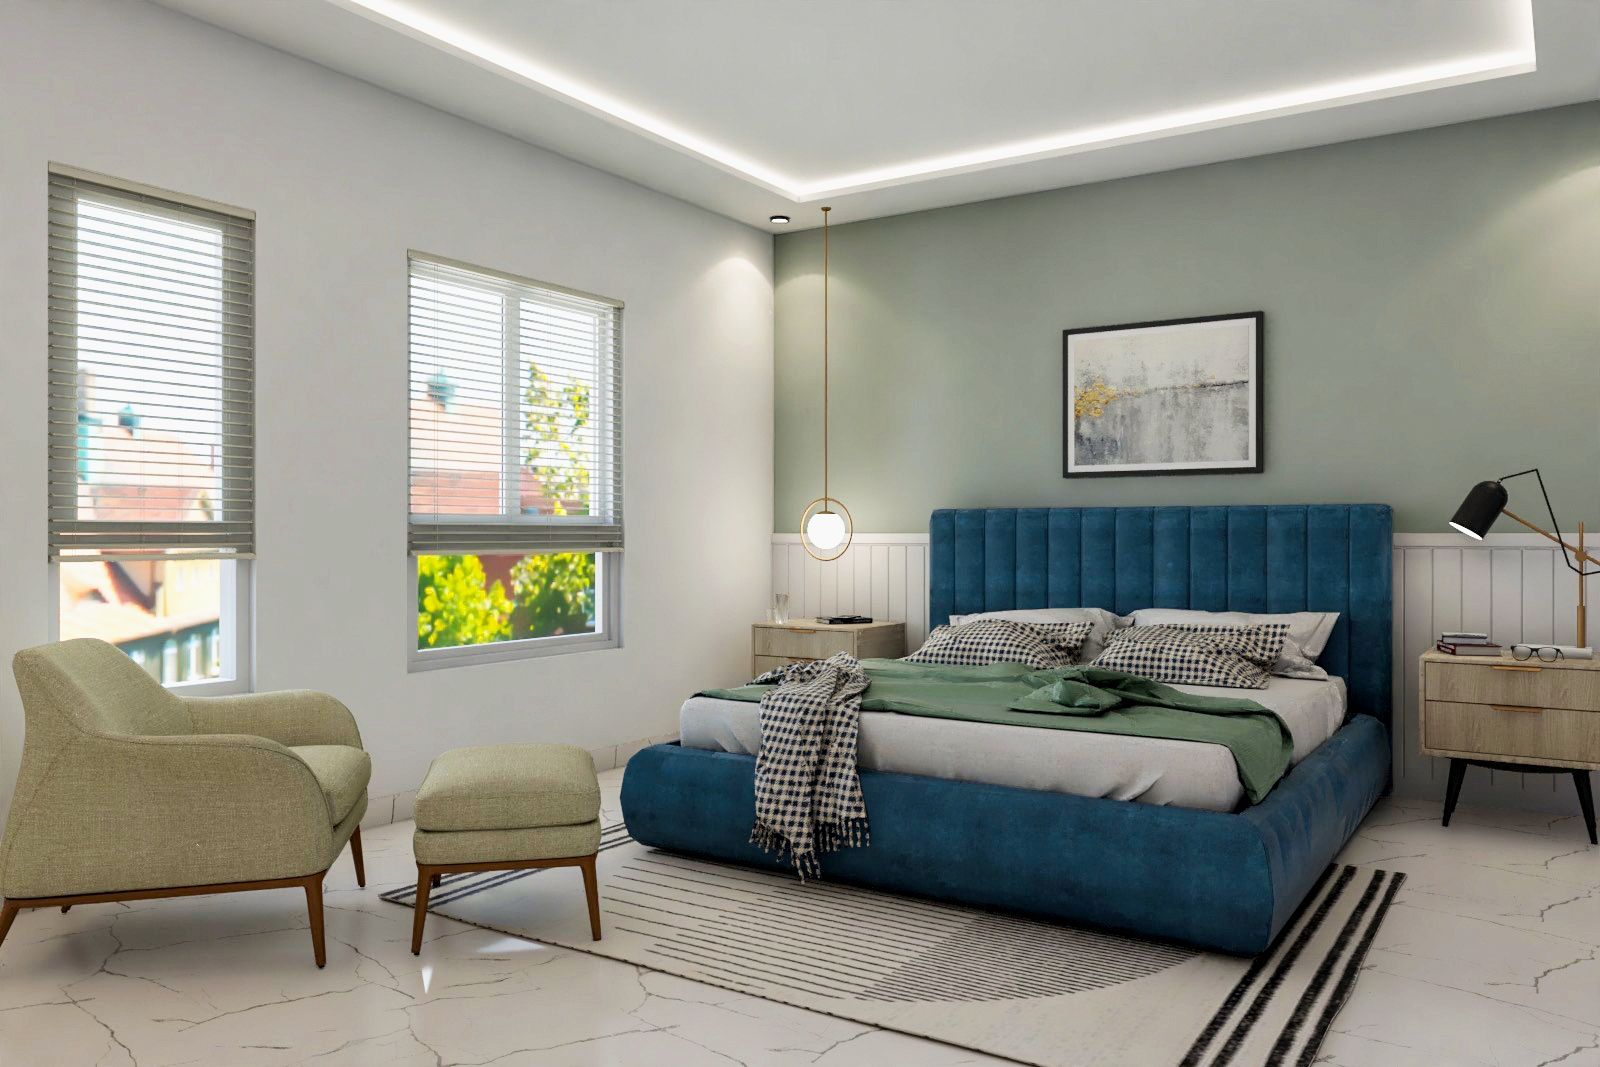 Modern Peripheral Single-Layered Ceiling Design With Cove Lights